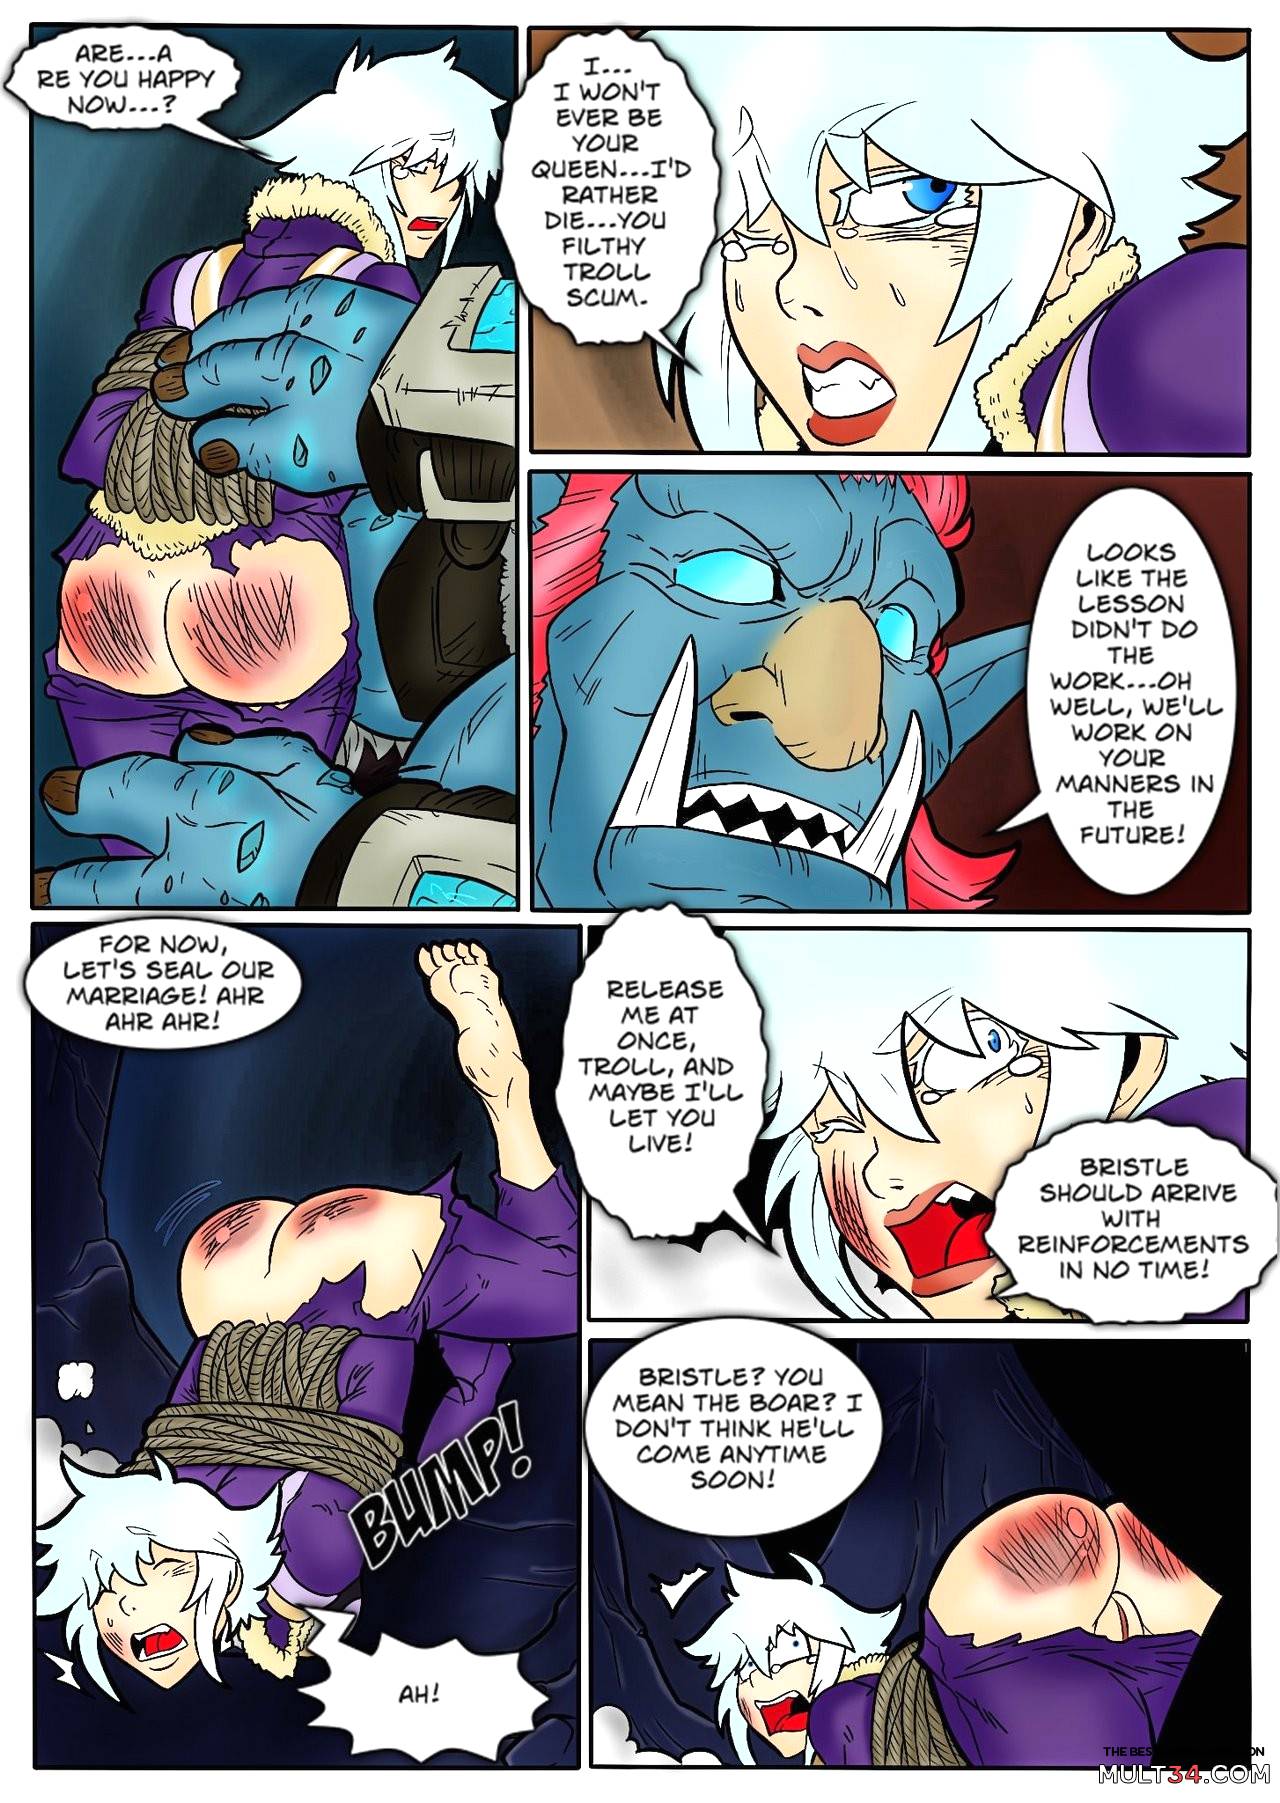 Tales of the Troll King ch. 1 - 3 ] [Colorized] page 27